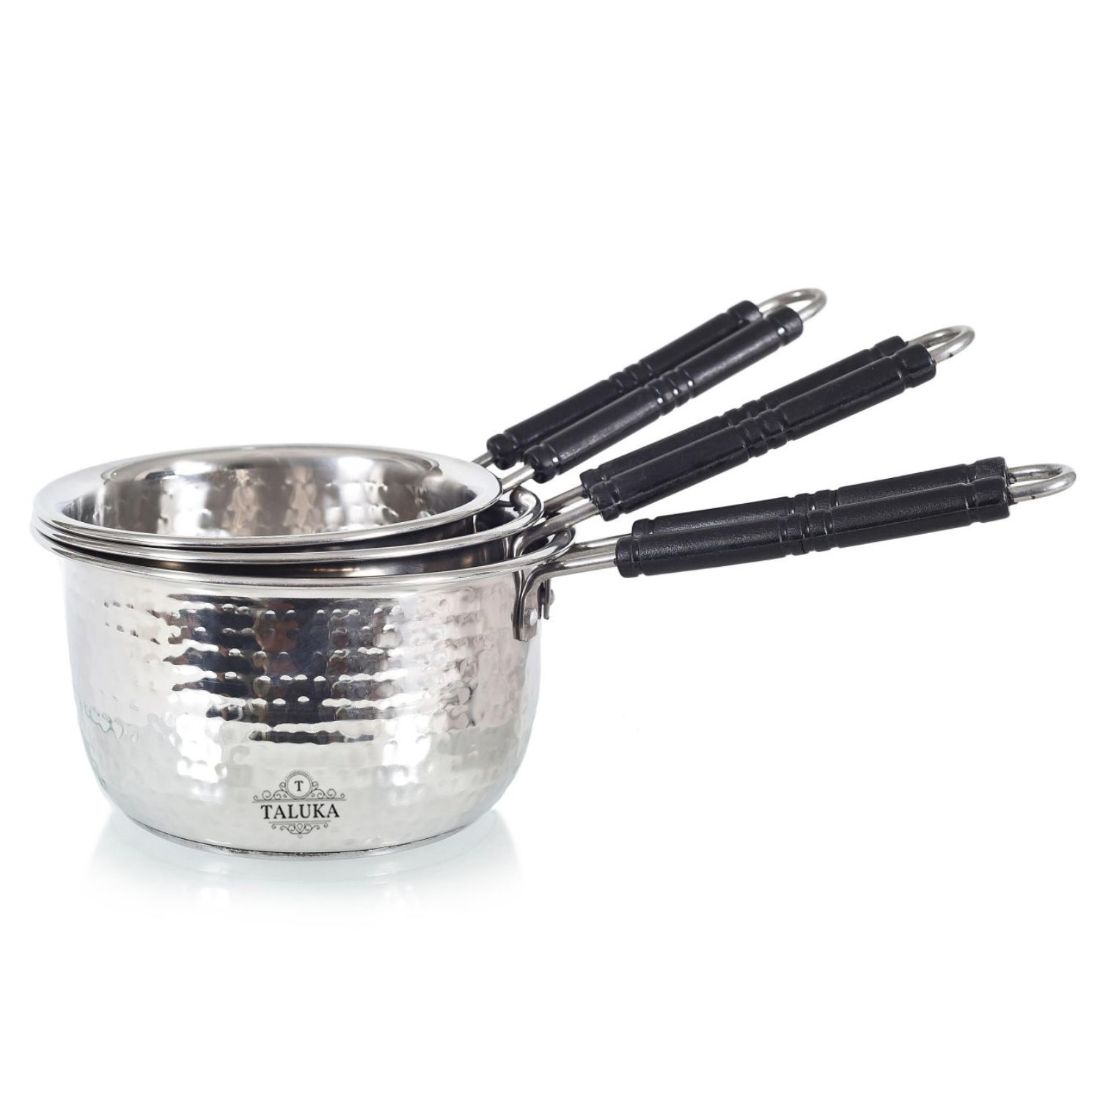 Premium Stainless Steel Hammered Inductions Friendly Sauce Pan Set of 3-1, 1.5, 2 Liter in Use for Hotel Home Restaurant